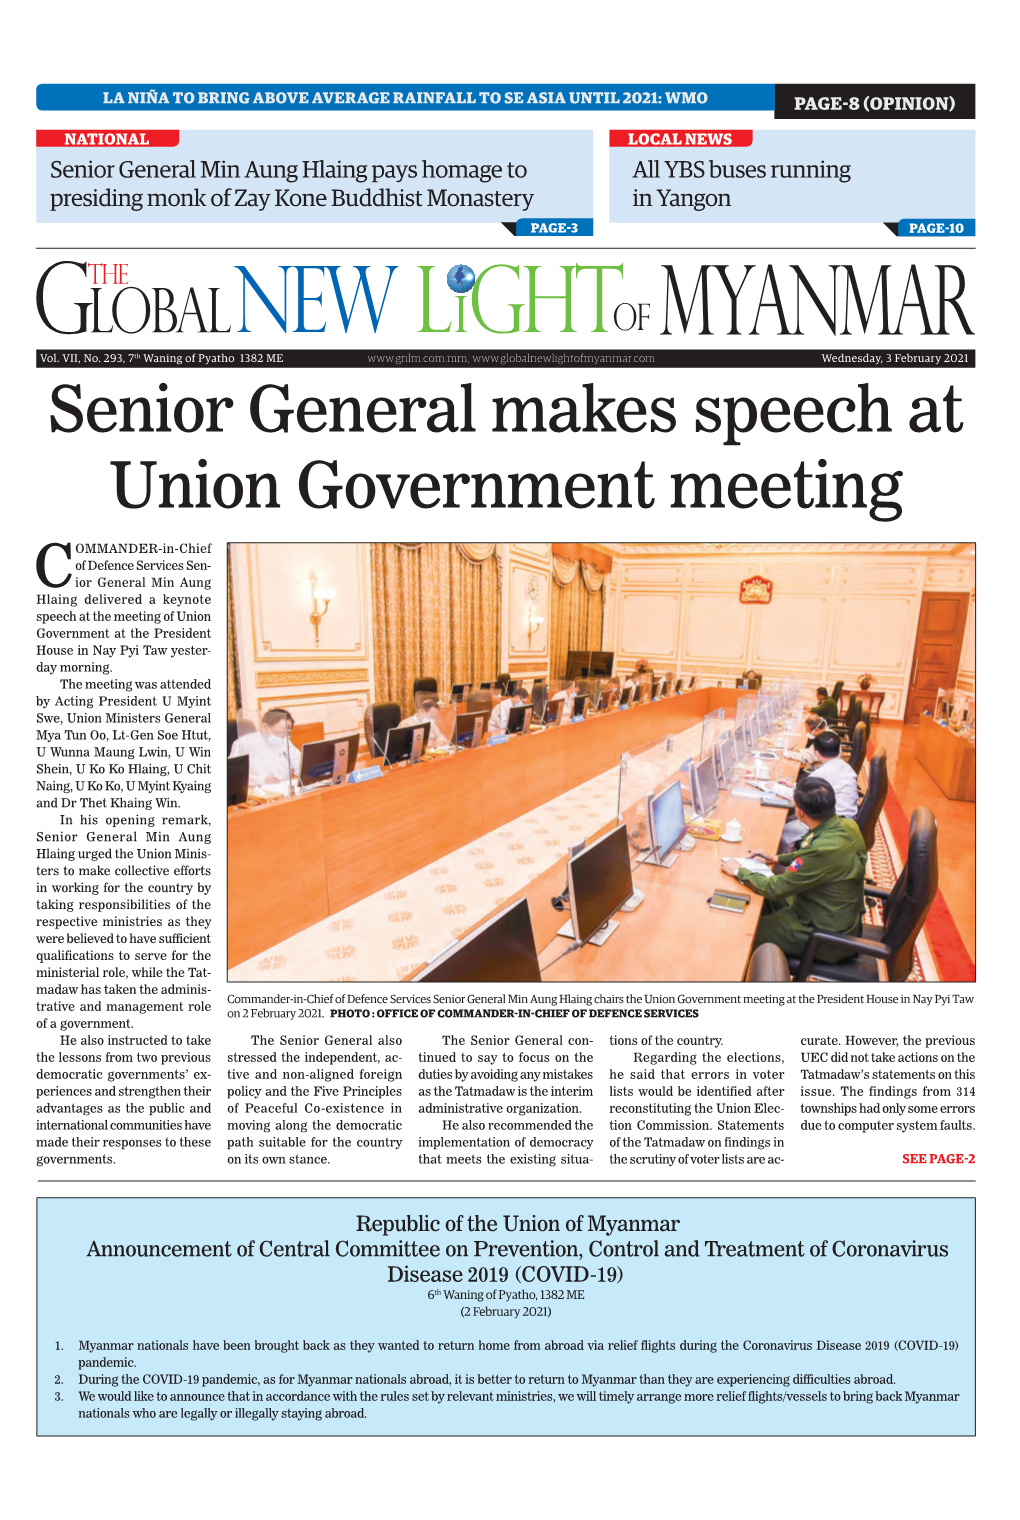 Senior General Makes Speech at Union Government Meeting